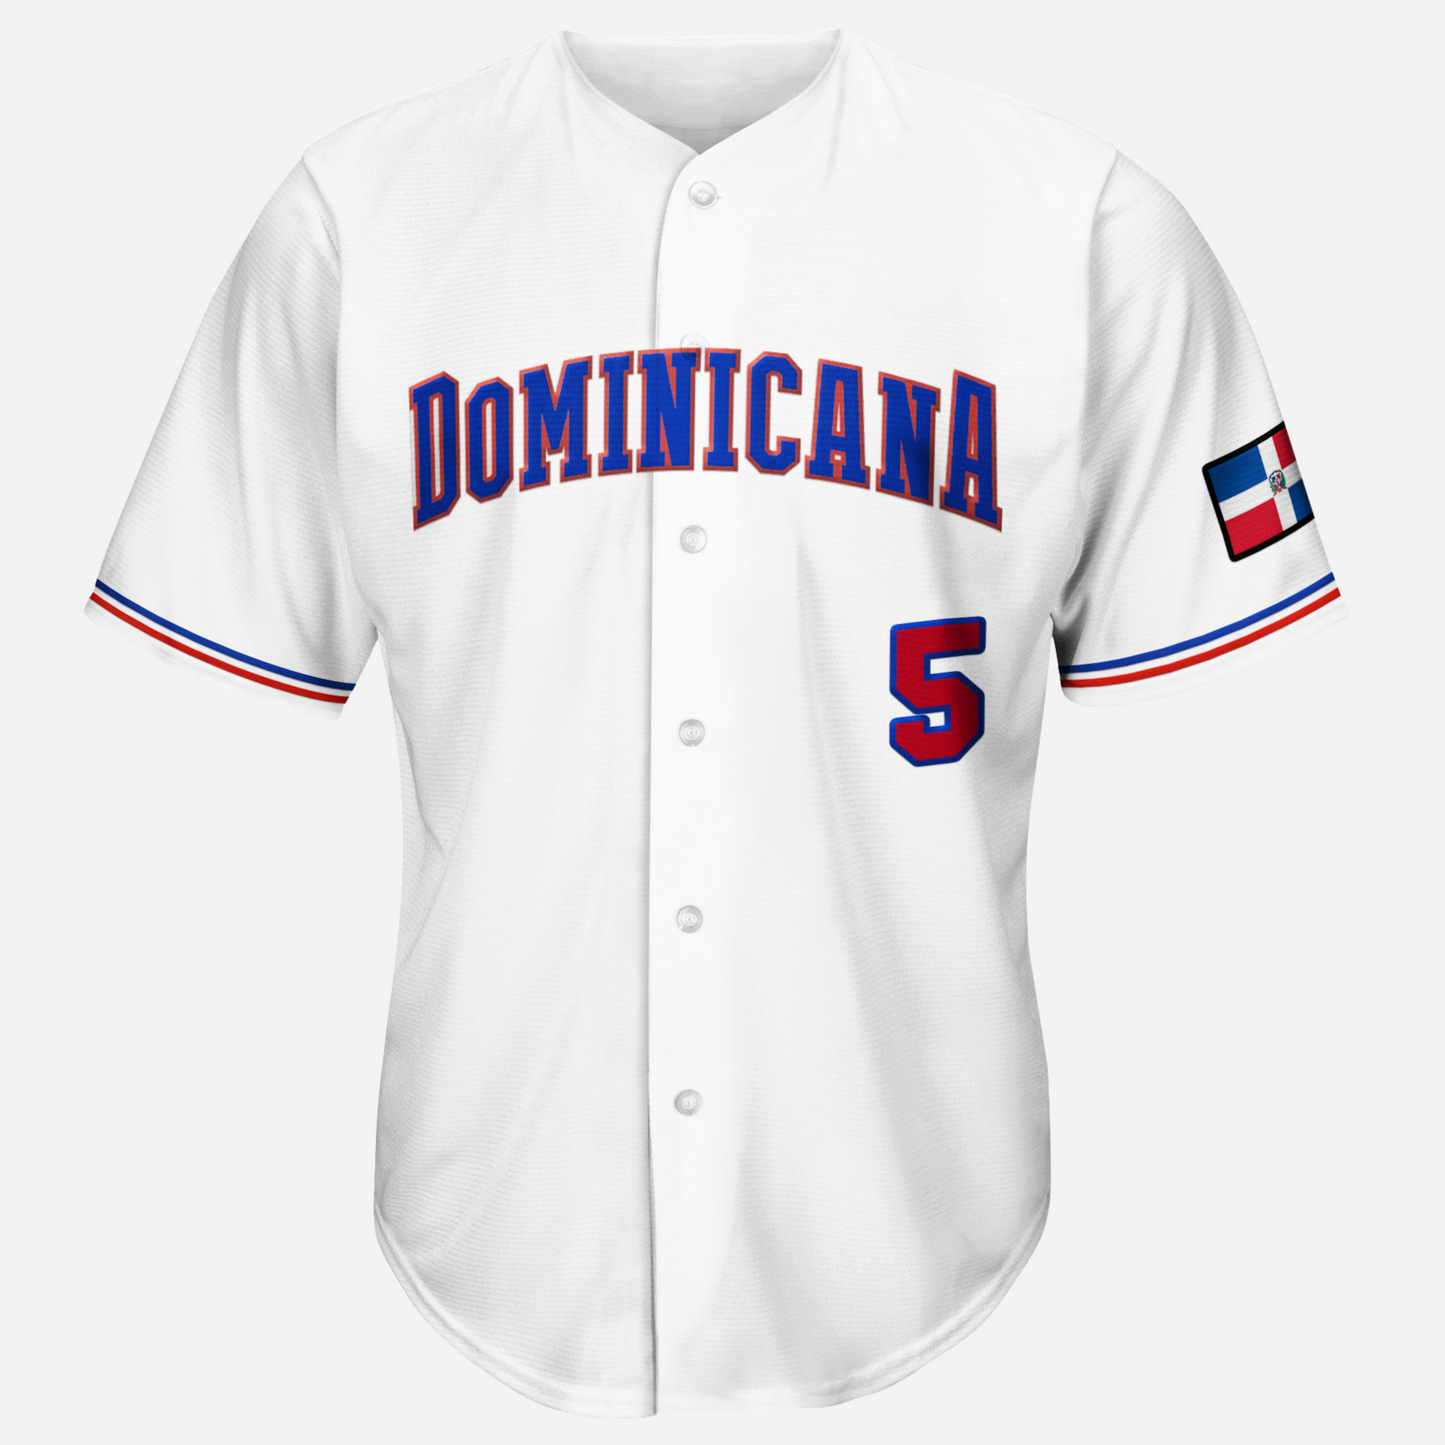 Baseball Dominican Republic Number Kit for 2017 White Jersey